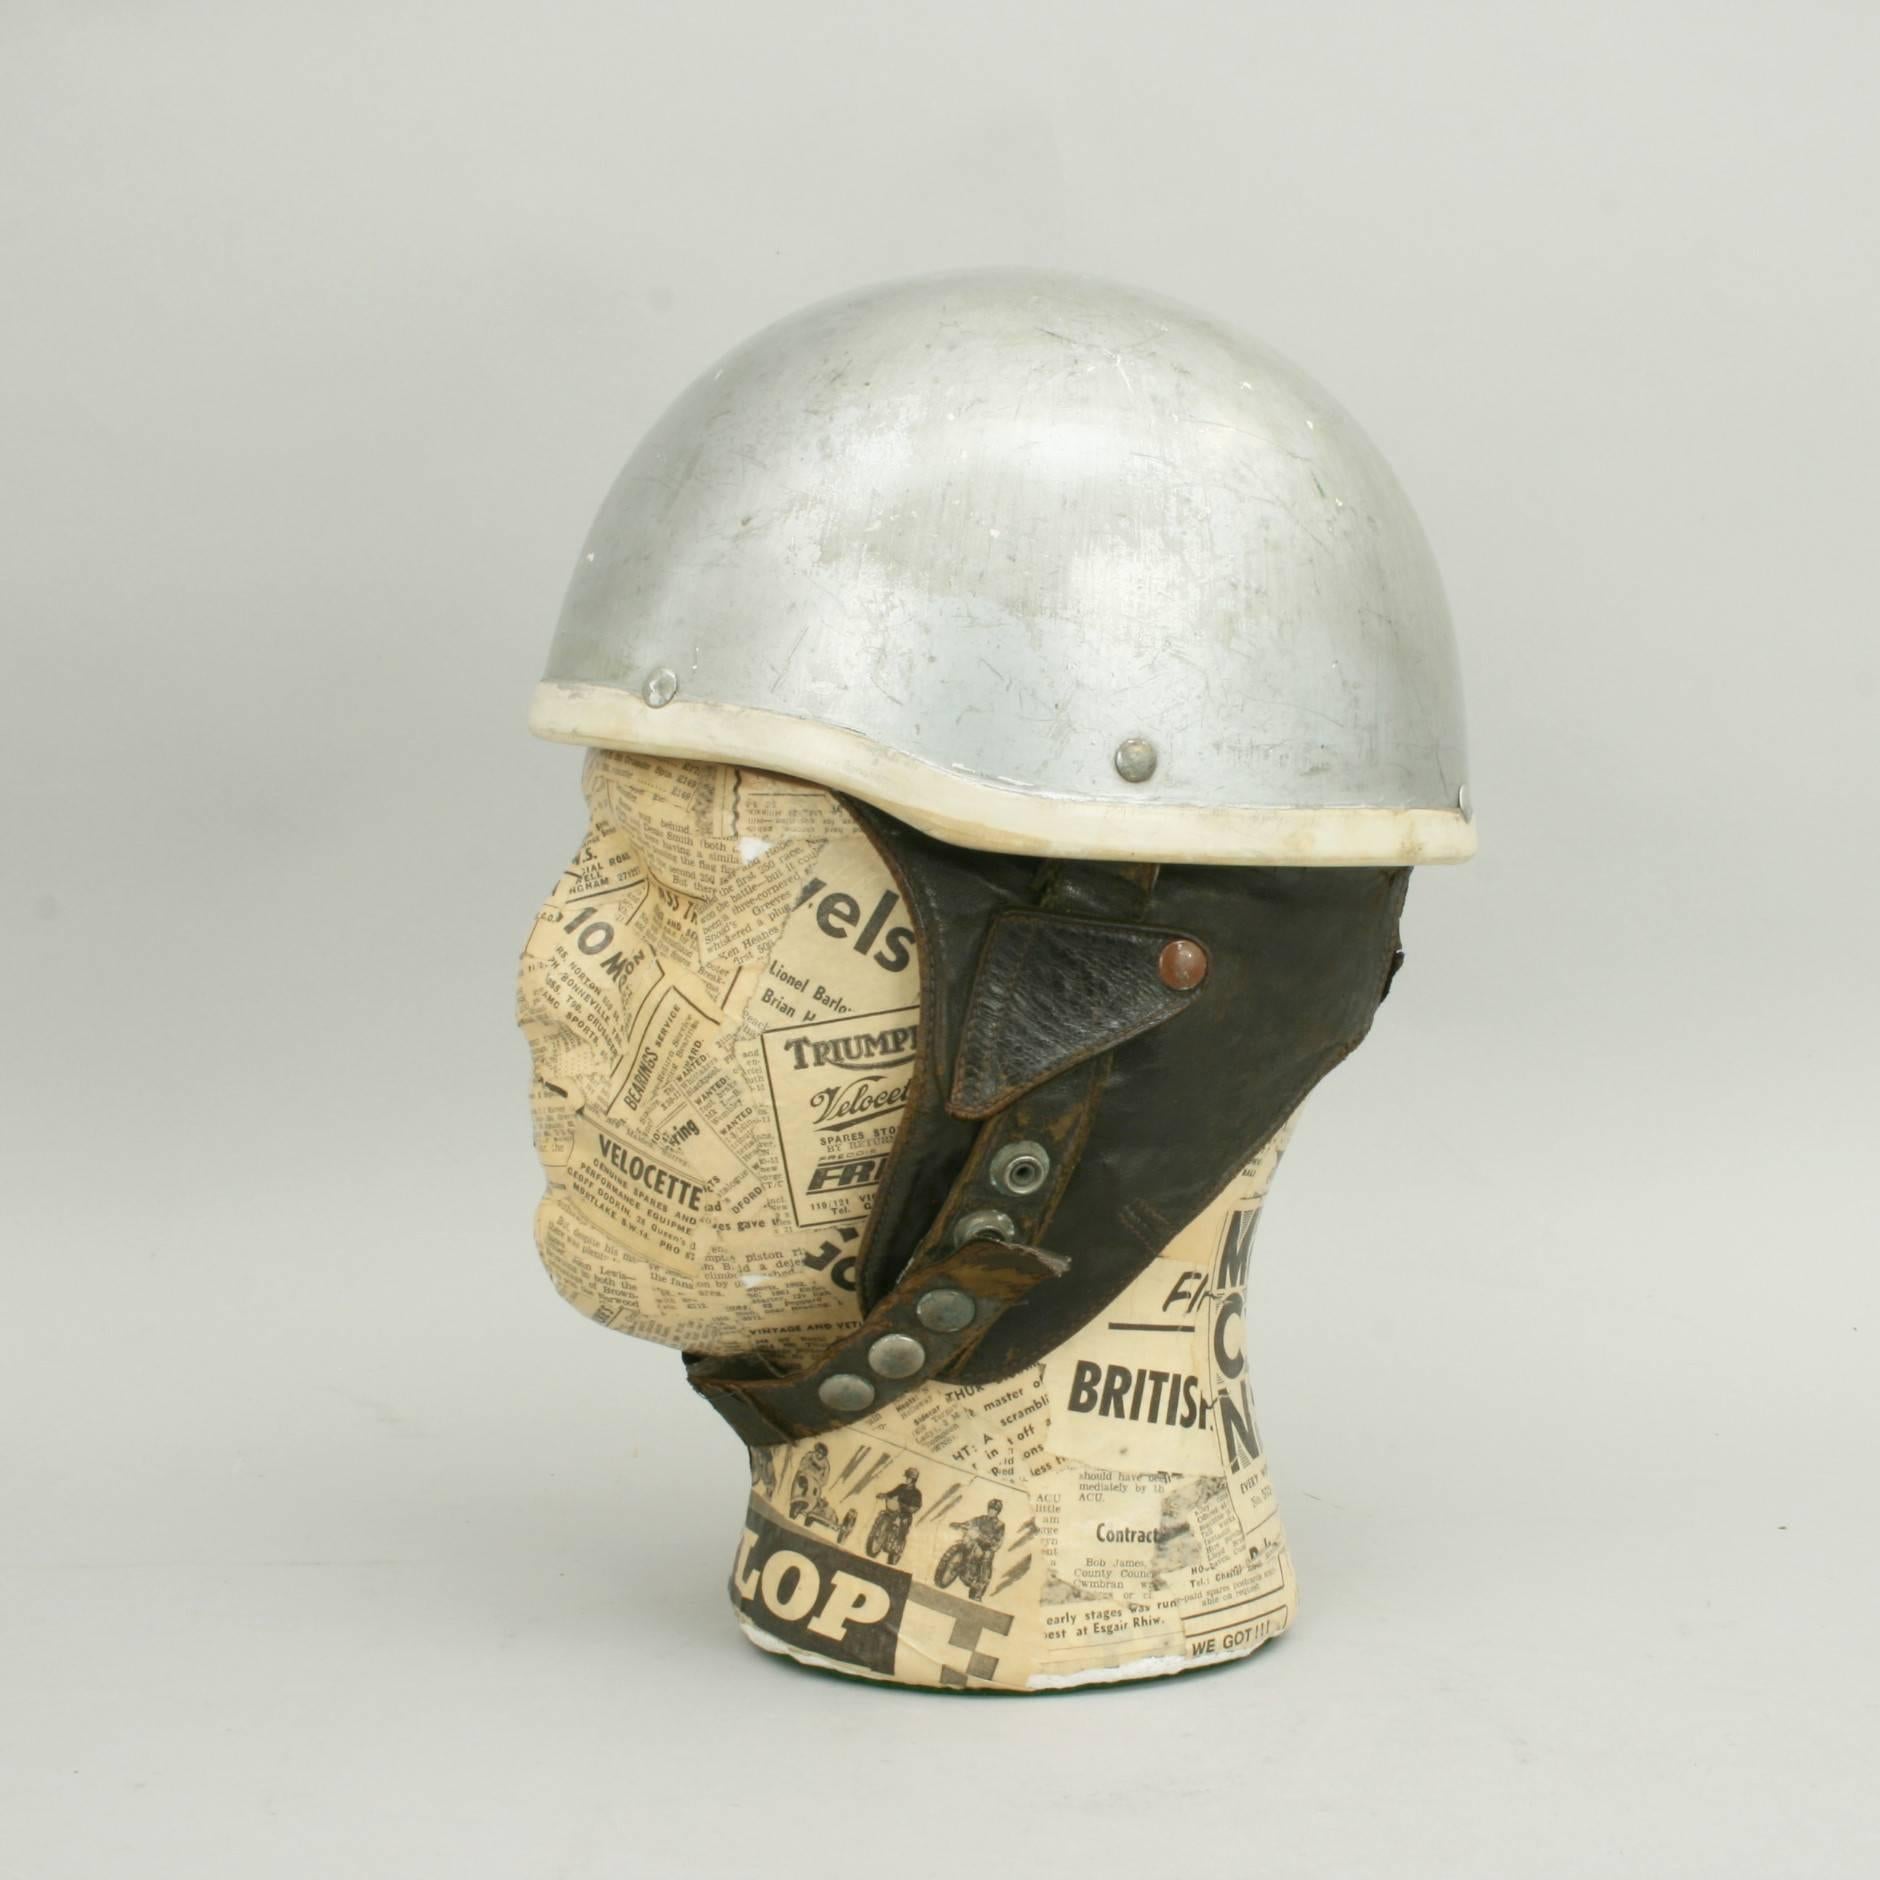 A good pudding basin motorcycle helmet made in England by Cromwell. The outer shell is painted silver with a material interior. Strong leather neck and earflaps are also fitted as is a chin strap. Inside the helmet is a Cromwell trade label. A good